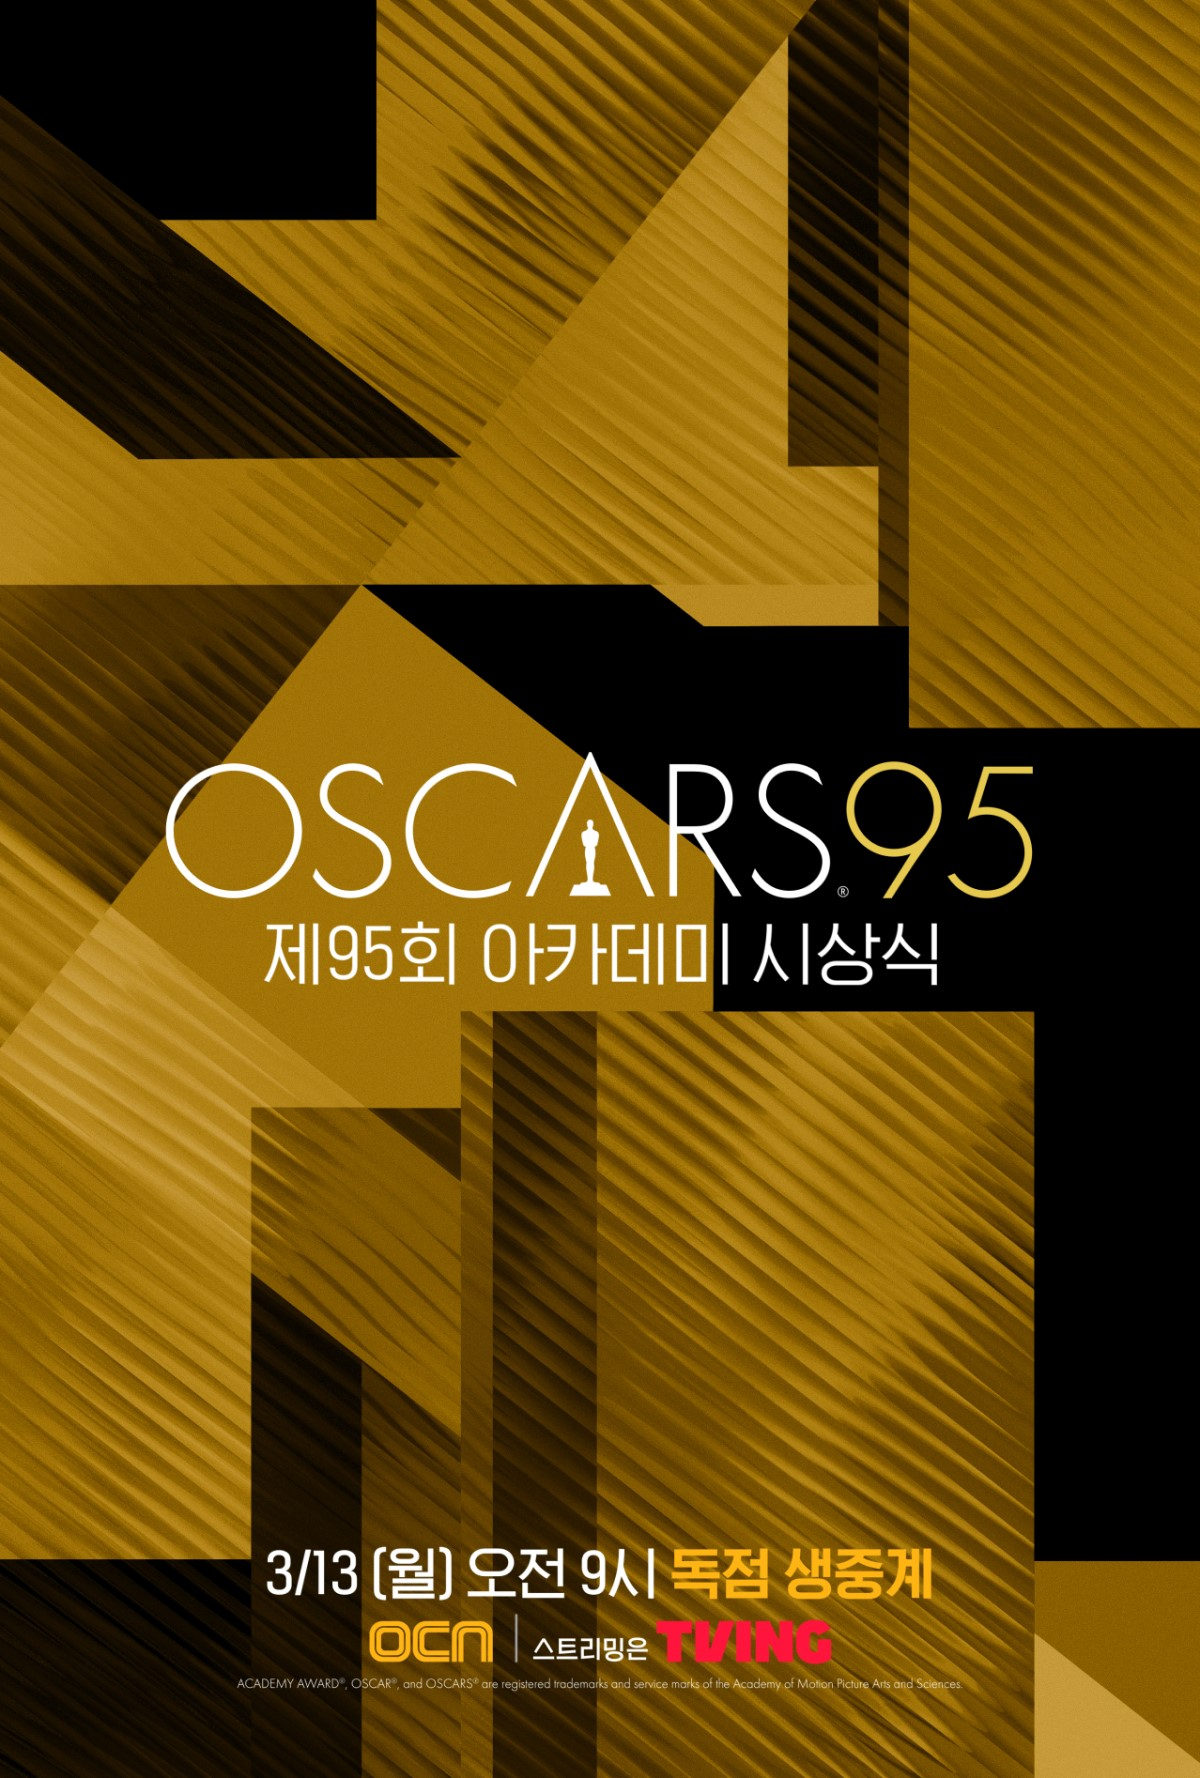 Poster image of the 95th Academy Awards (Academy of Motion Picture Arts and Sciences, CJ ENM)